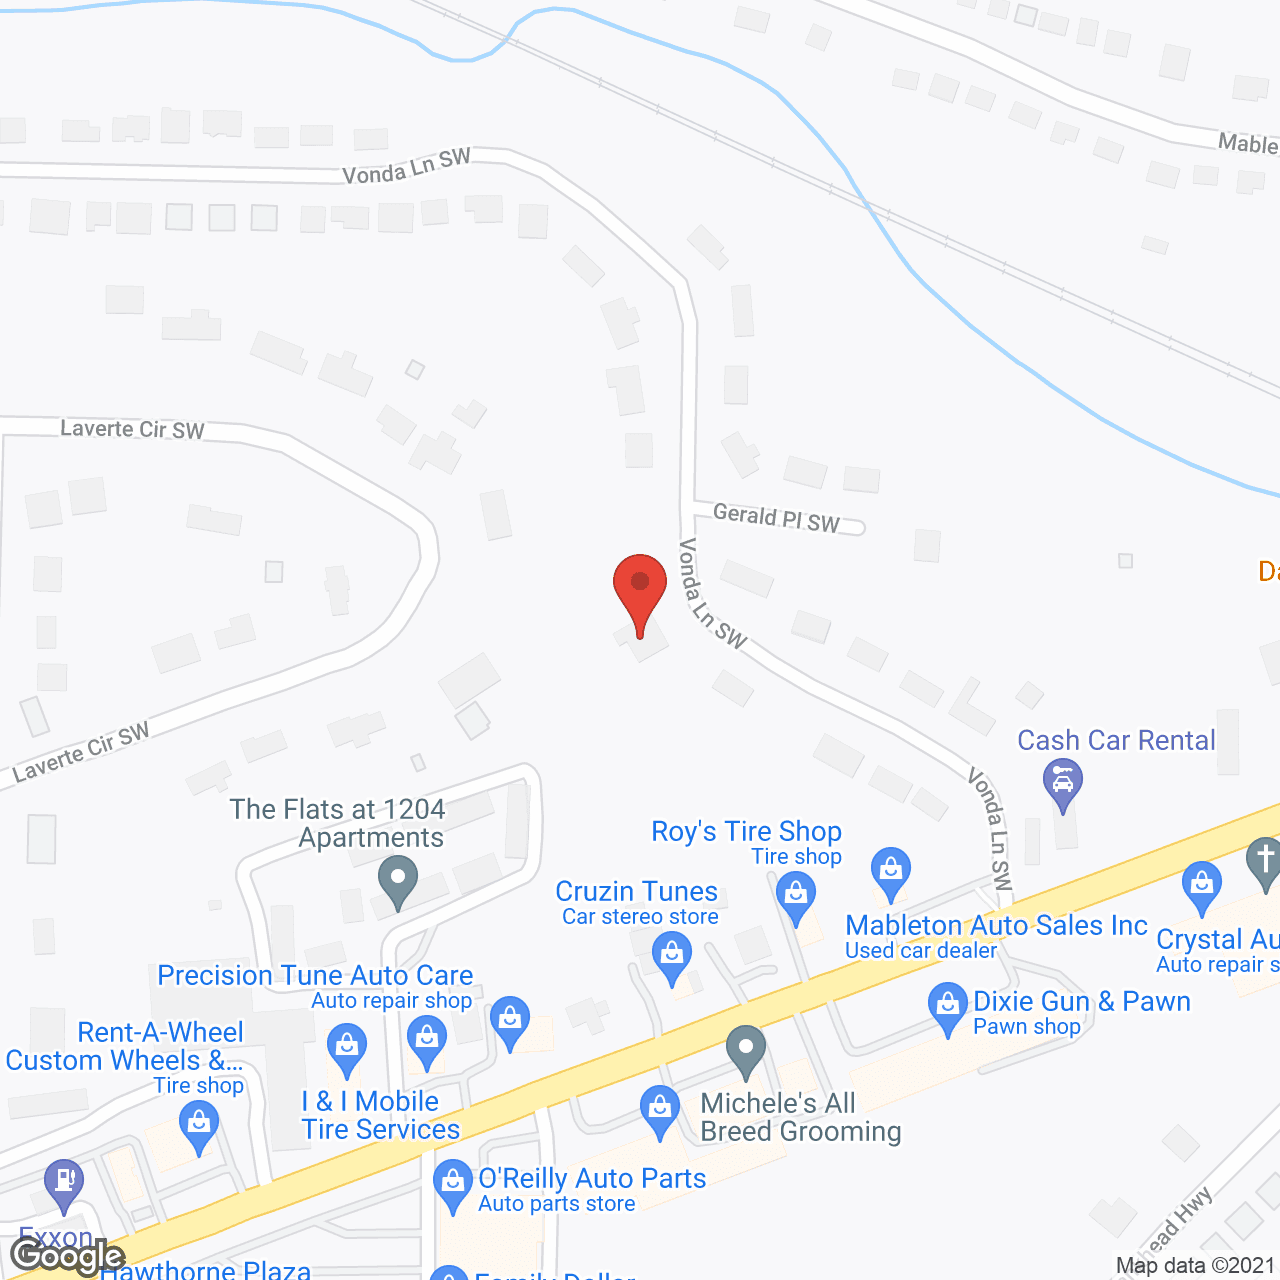 St. Benedict Personal Care Home in google map